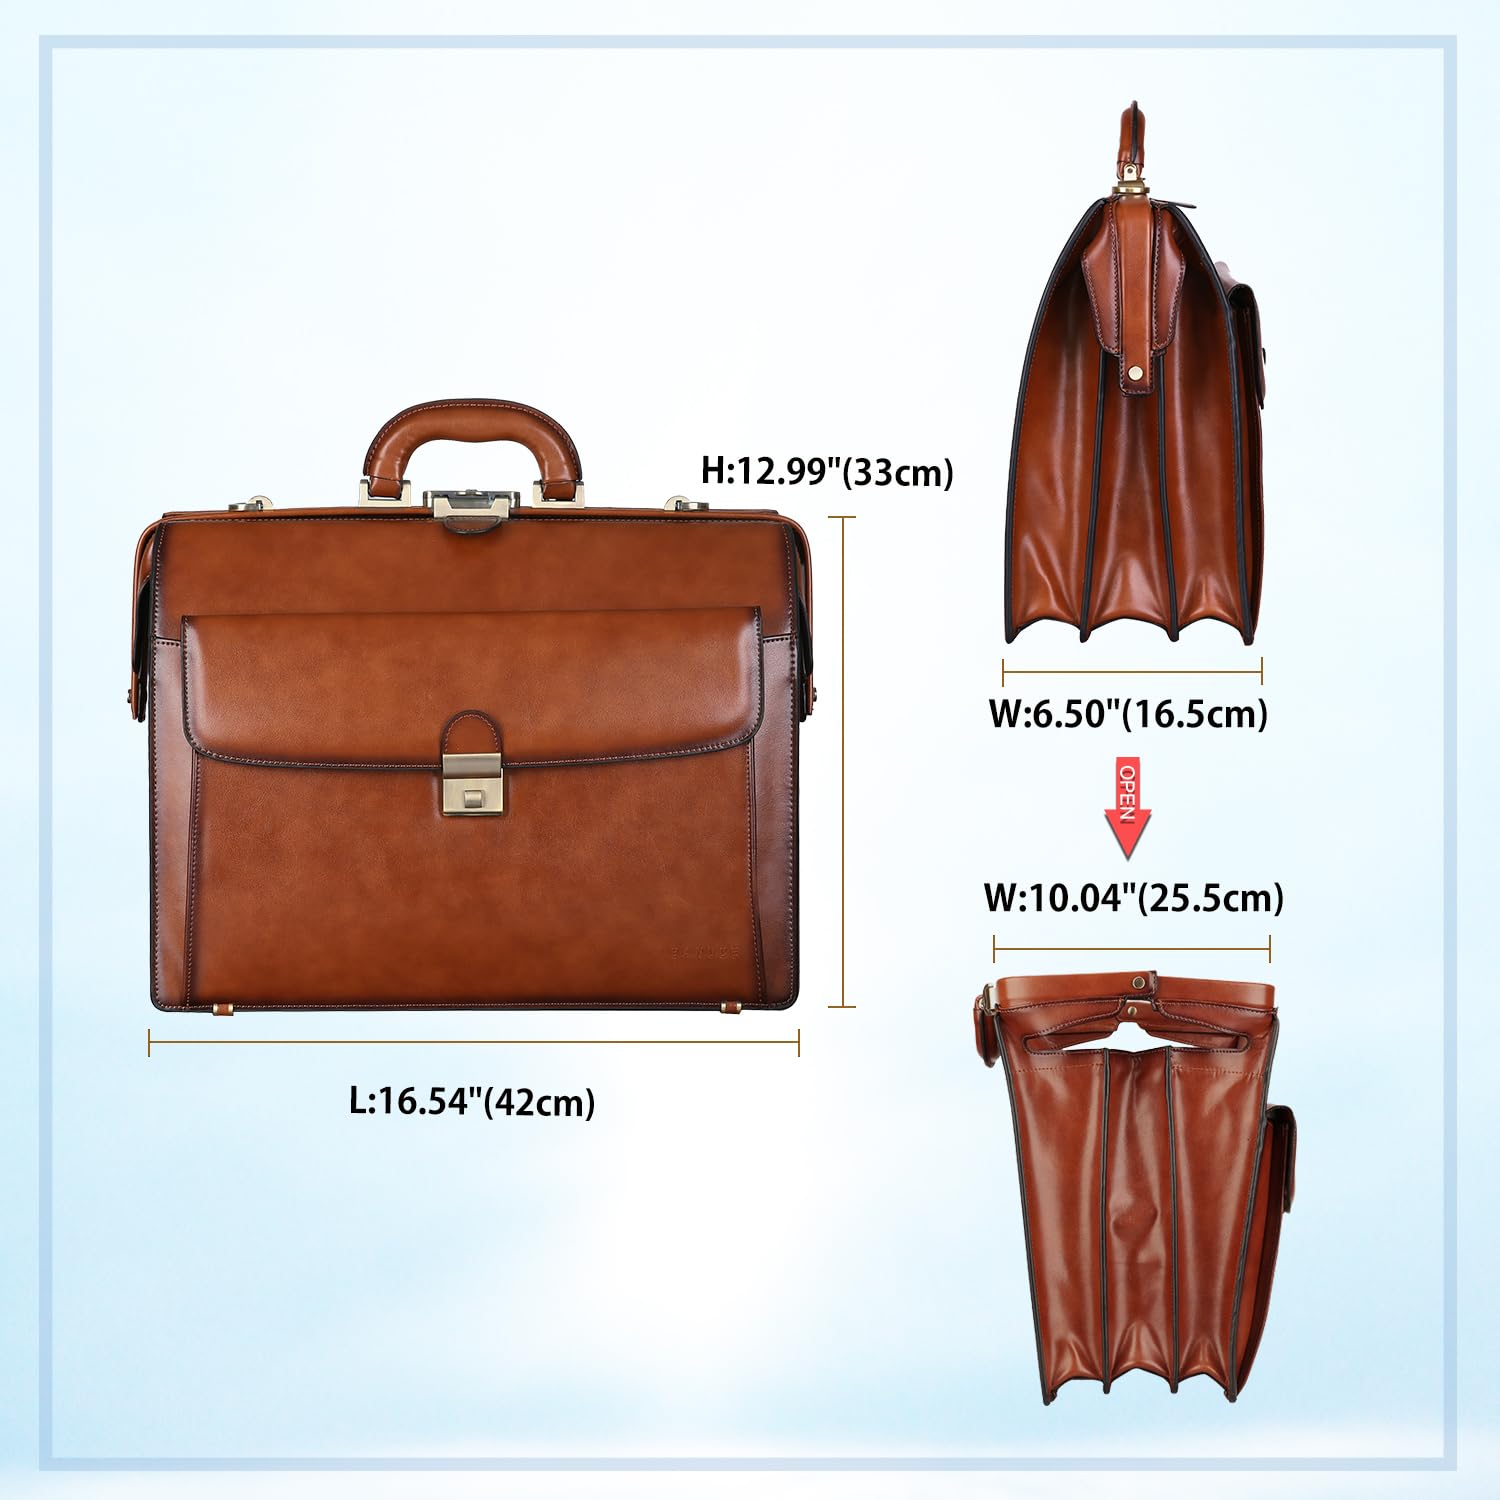 Banuce Leather Briefcase for Men with Lock Lawyer Attache Case Hard 15.6 Laptop Attorney Litigator Bag Doctor Style Bag